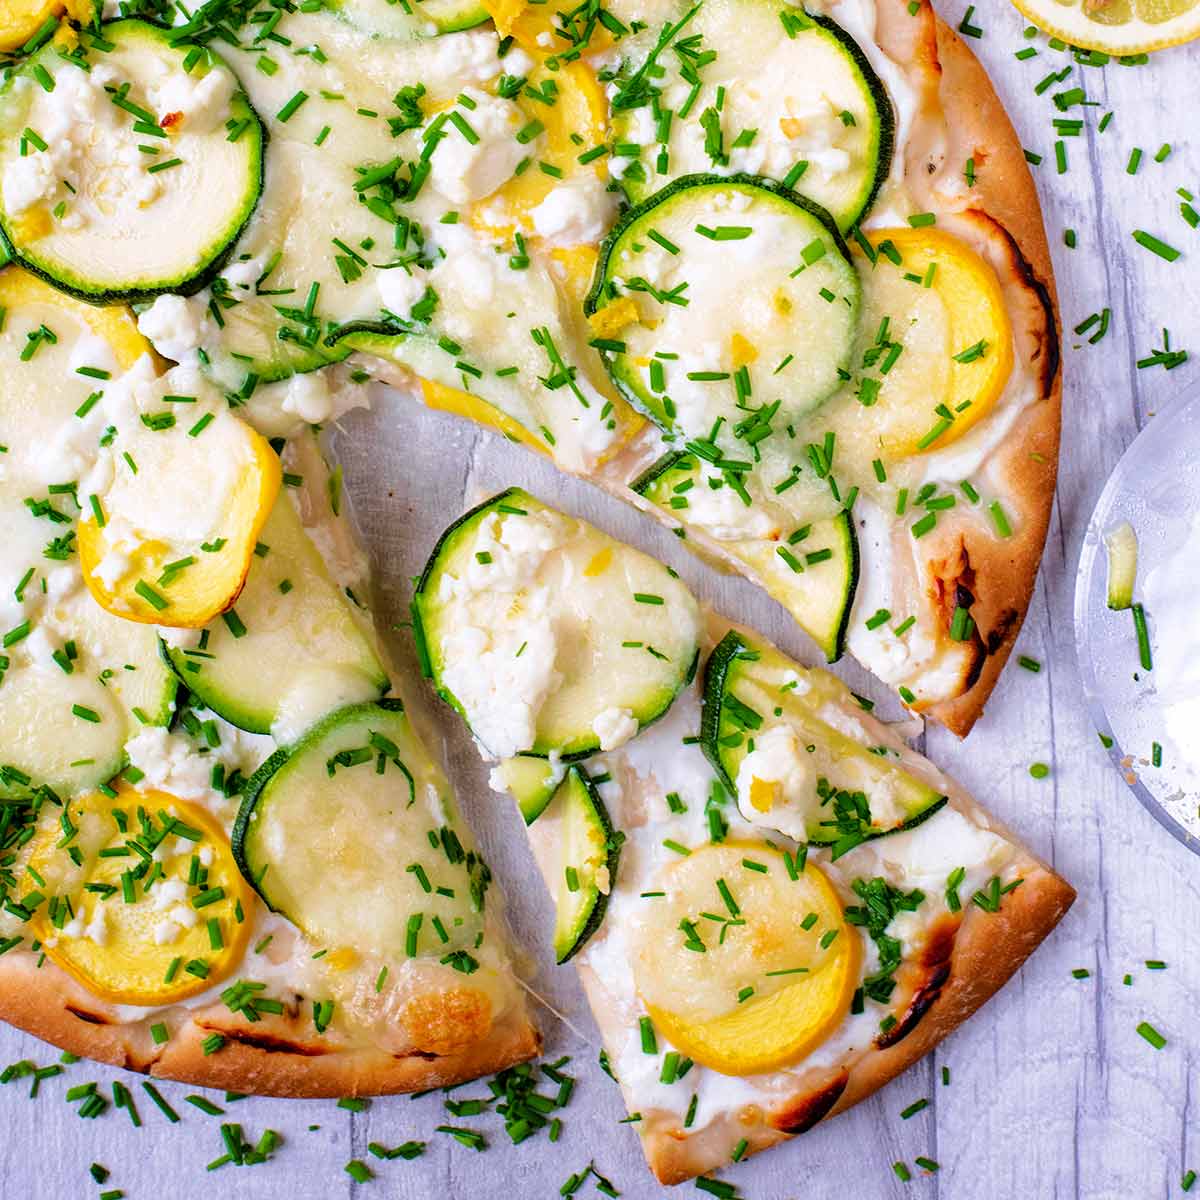 Courgette and lemon pizza on a wooden surface surrounded by sliced courgette.